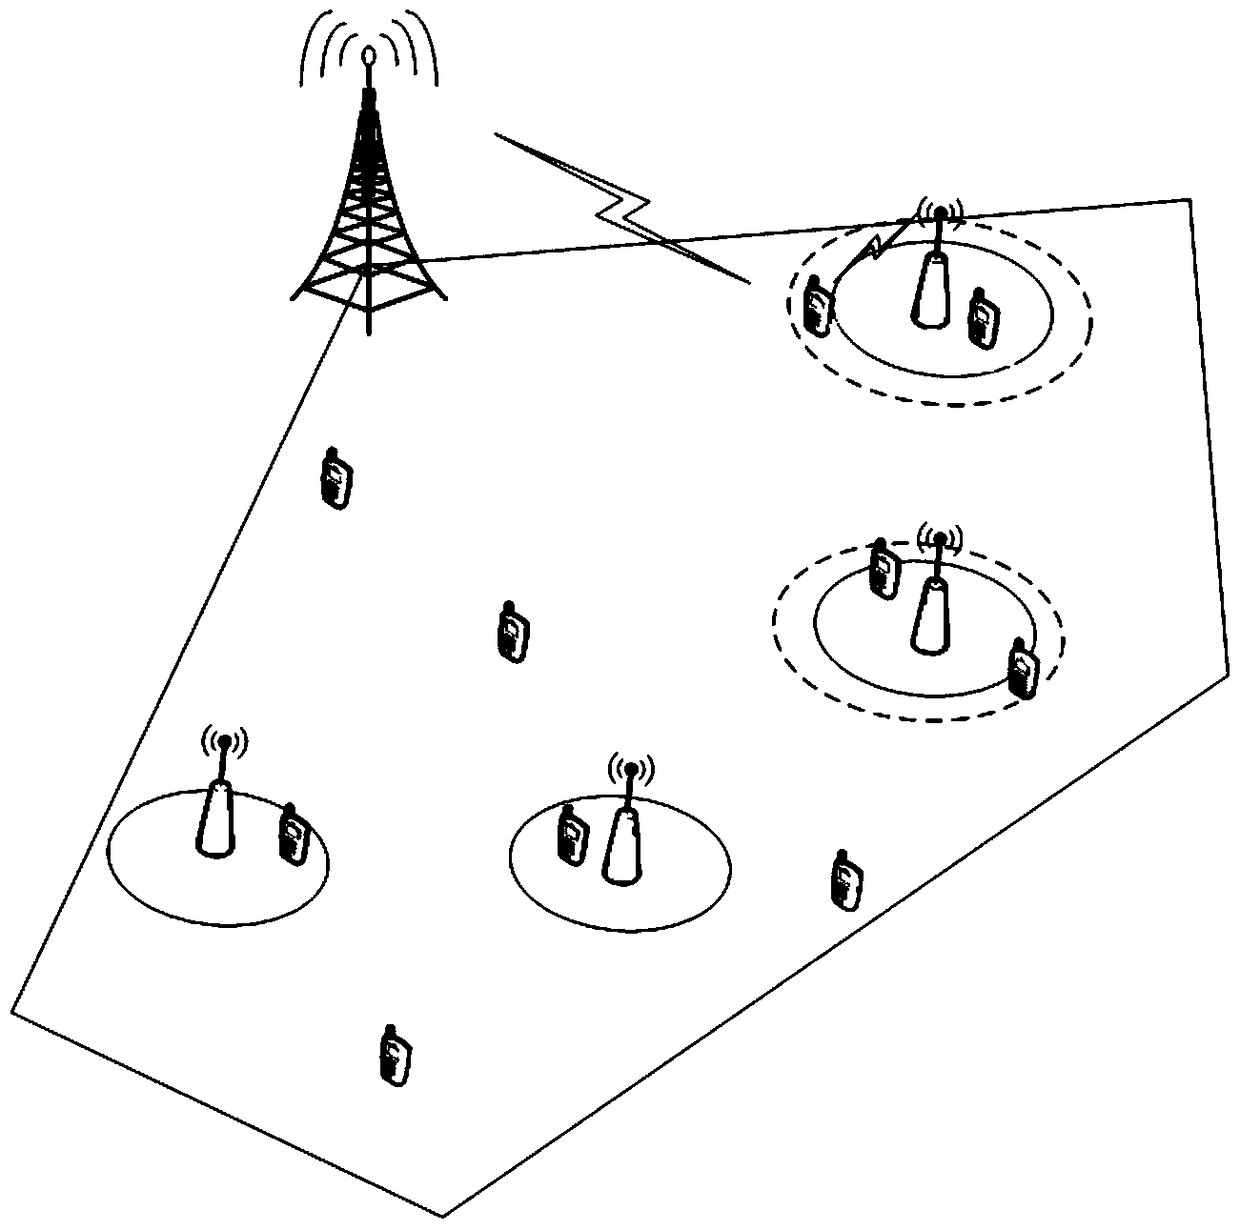 A method for cell base station range extension and base station selection based on signal-to-interference-noise ratio